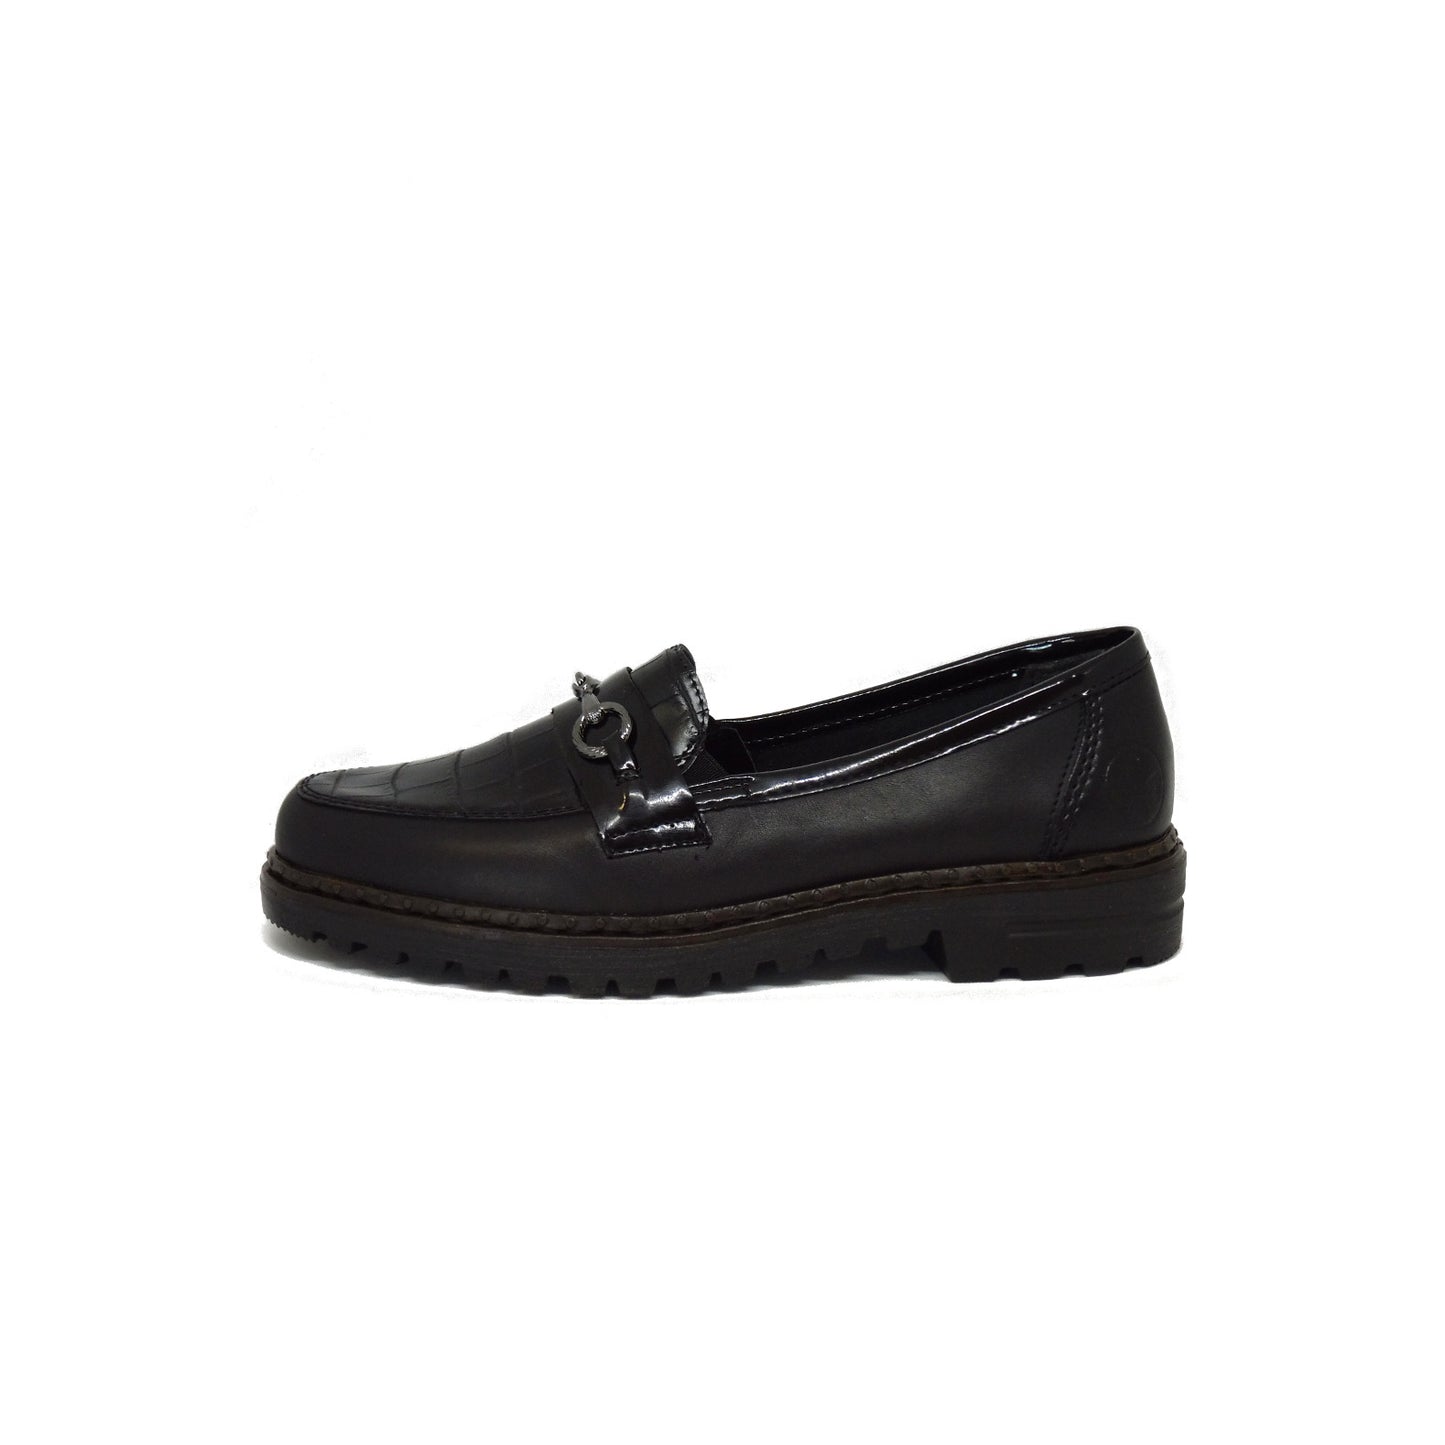 54862/01 Black (size 36) - ONLINE ONLY